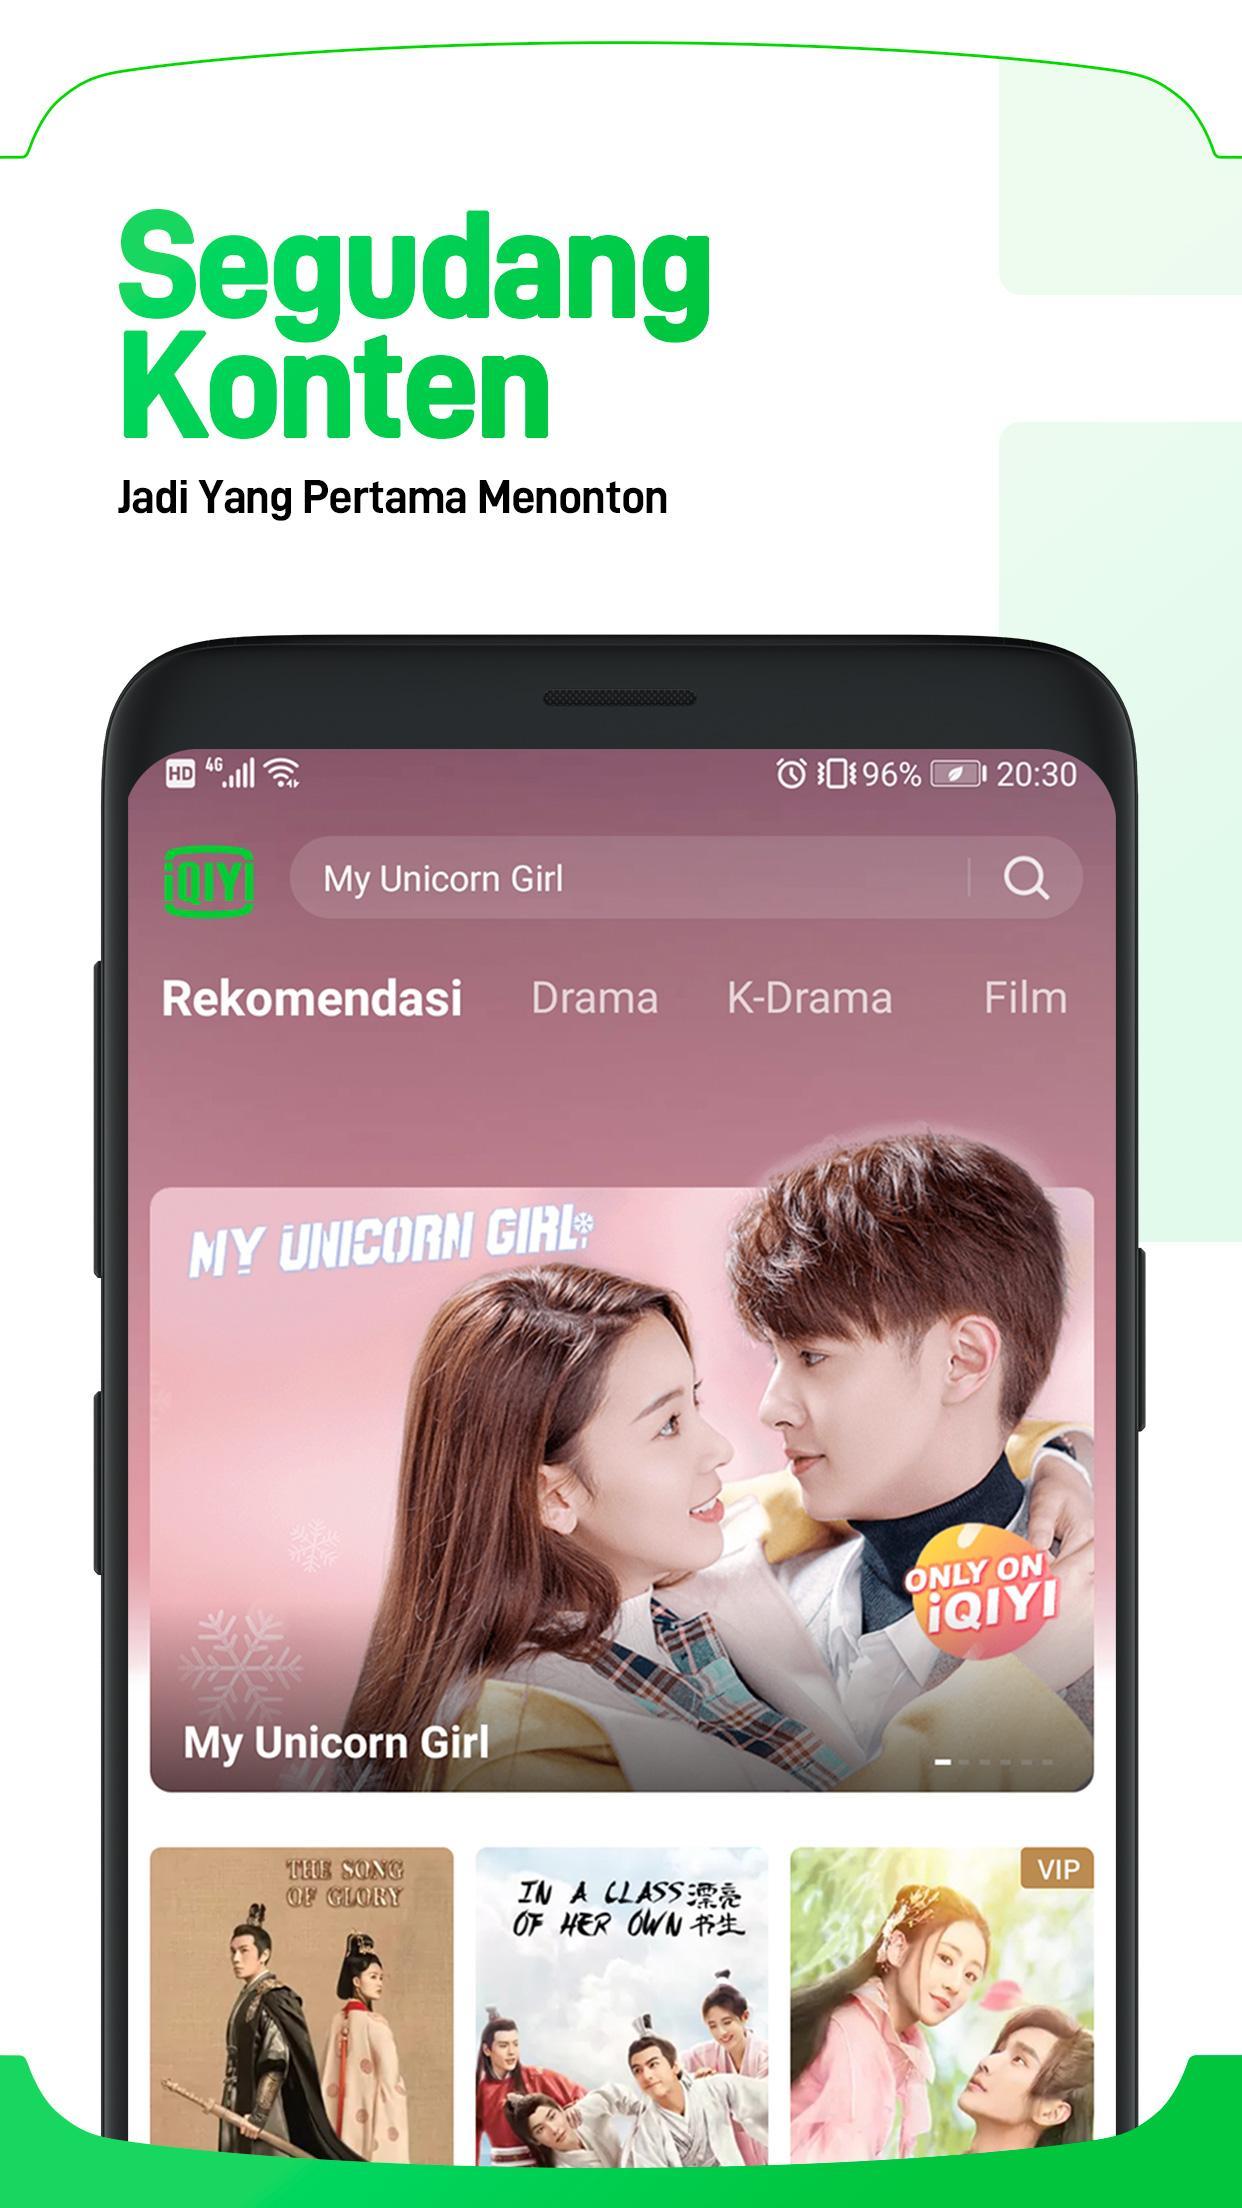 iQIYI for Android - APK Download